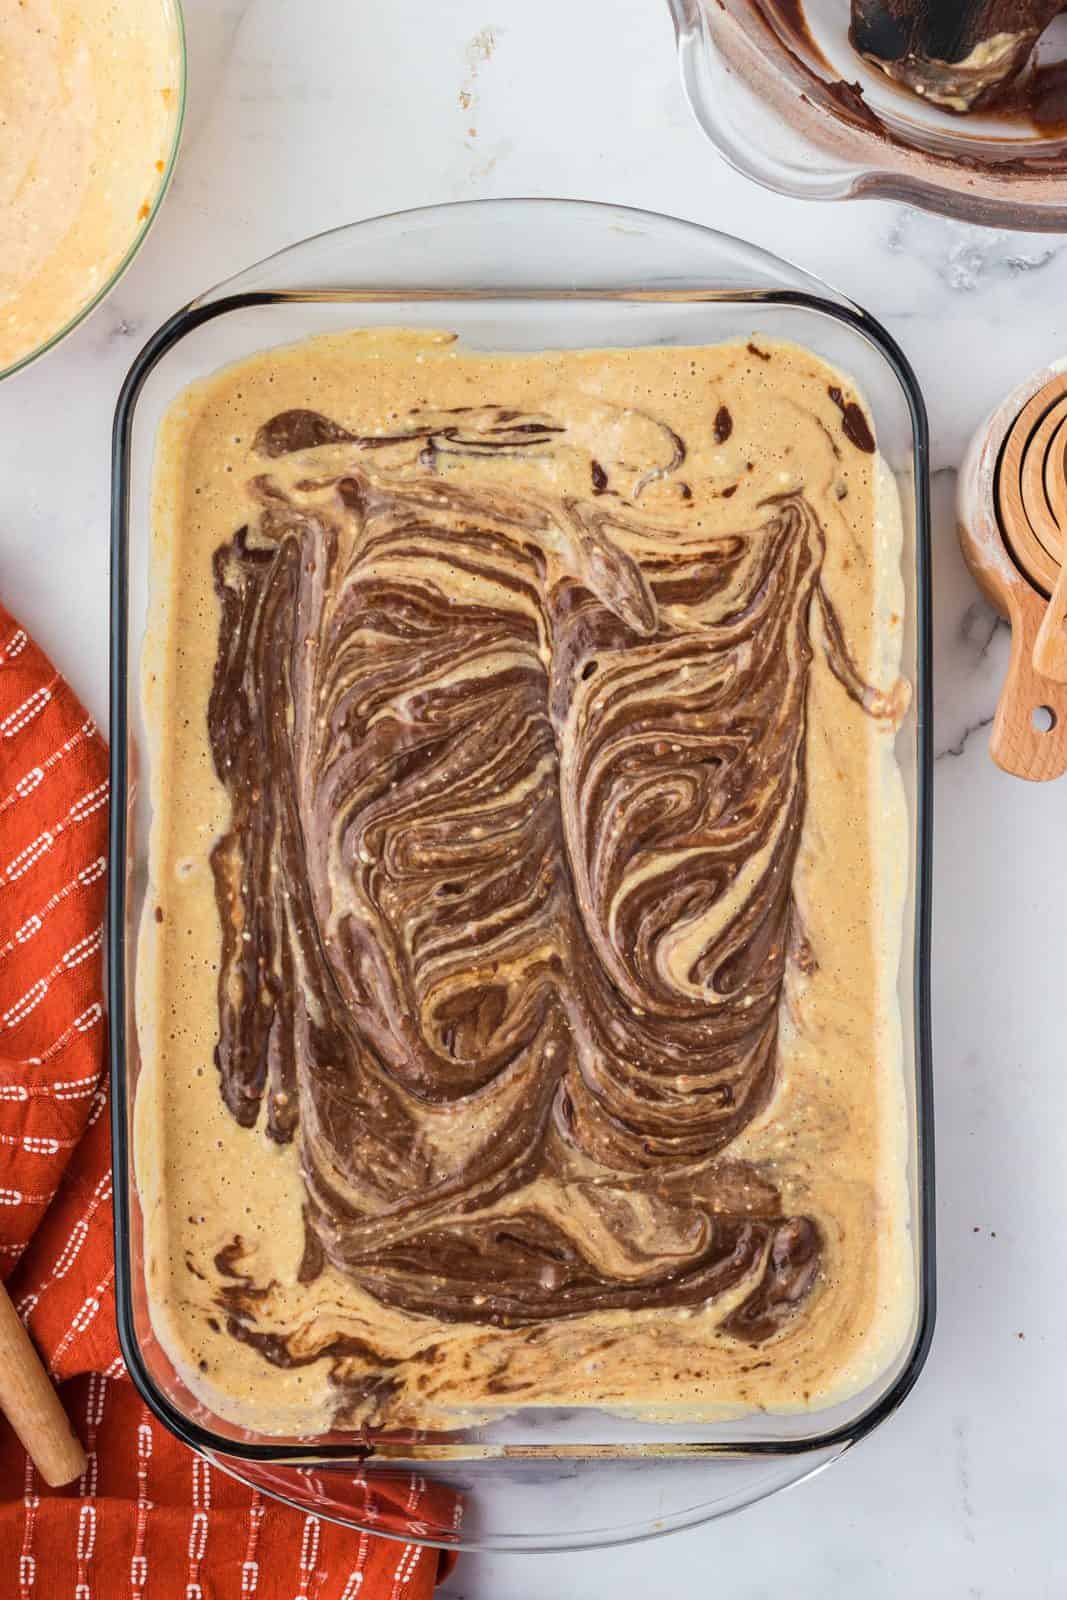 Pumpkin layer and remaining brownie batter added to pan and swirled together.